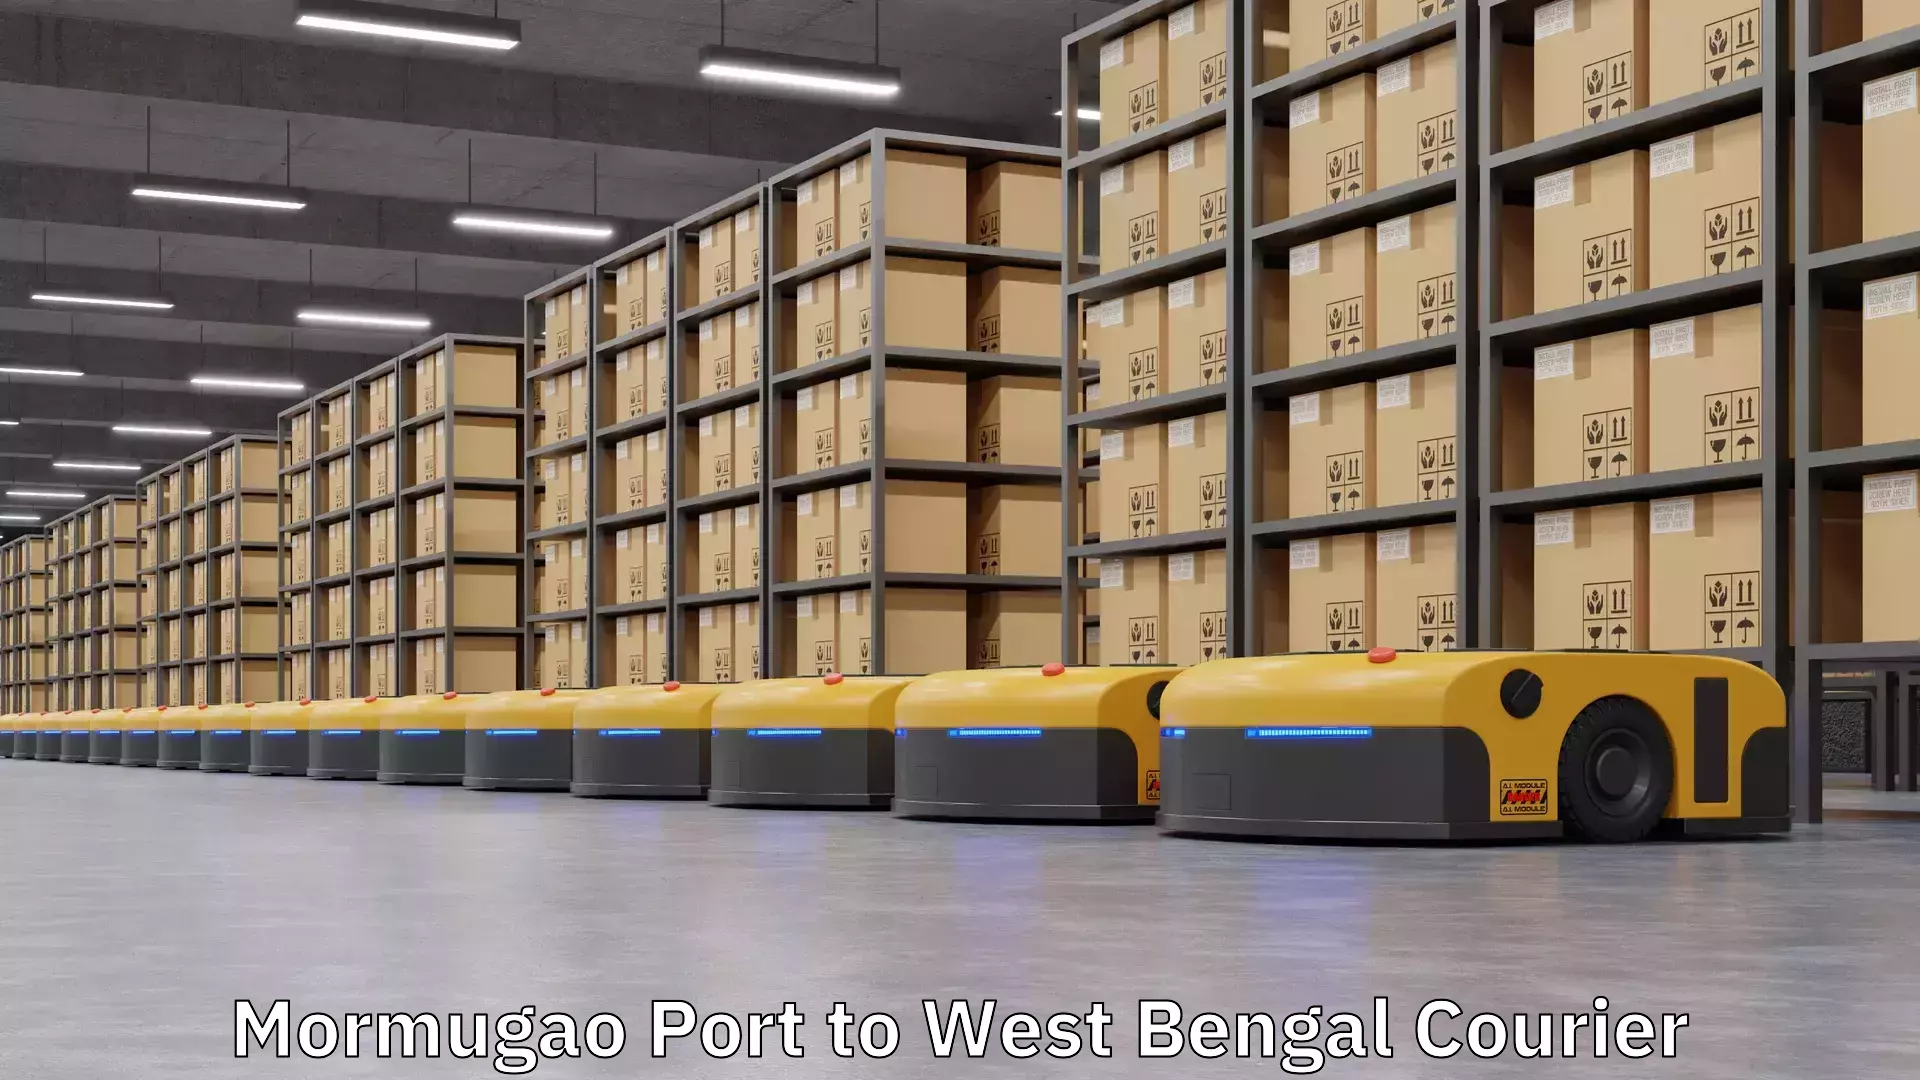 State-of-the-art courier technology Mormugao Port to West Bengal